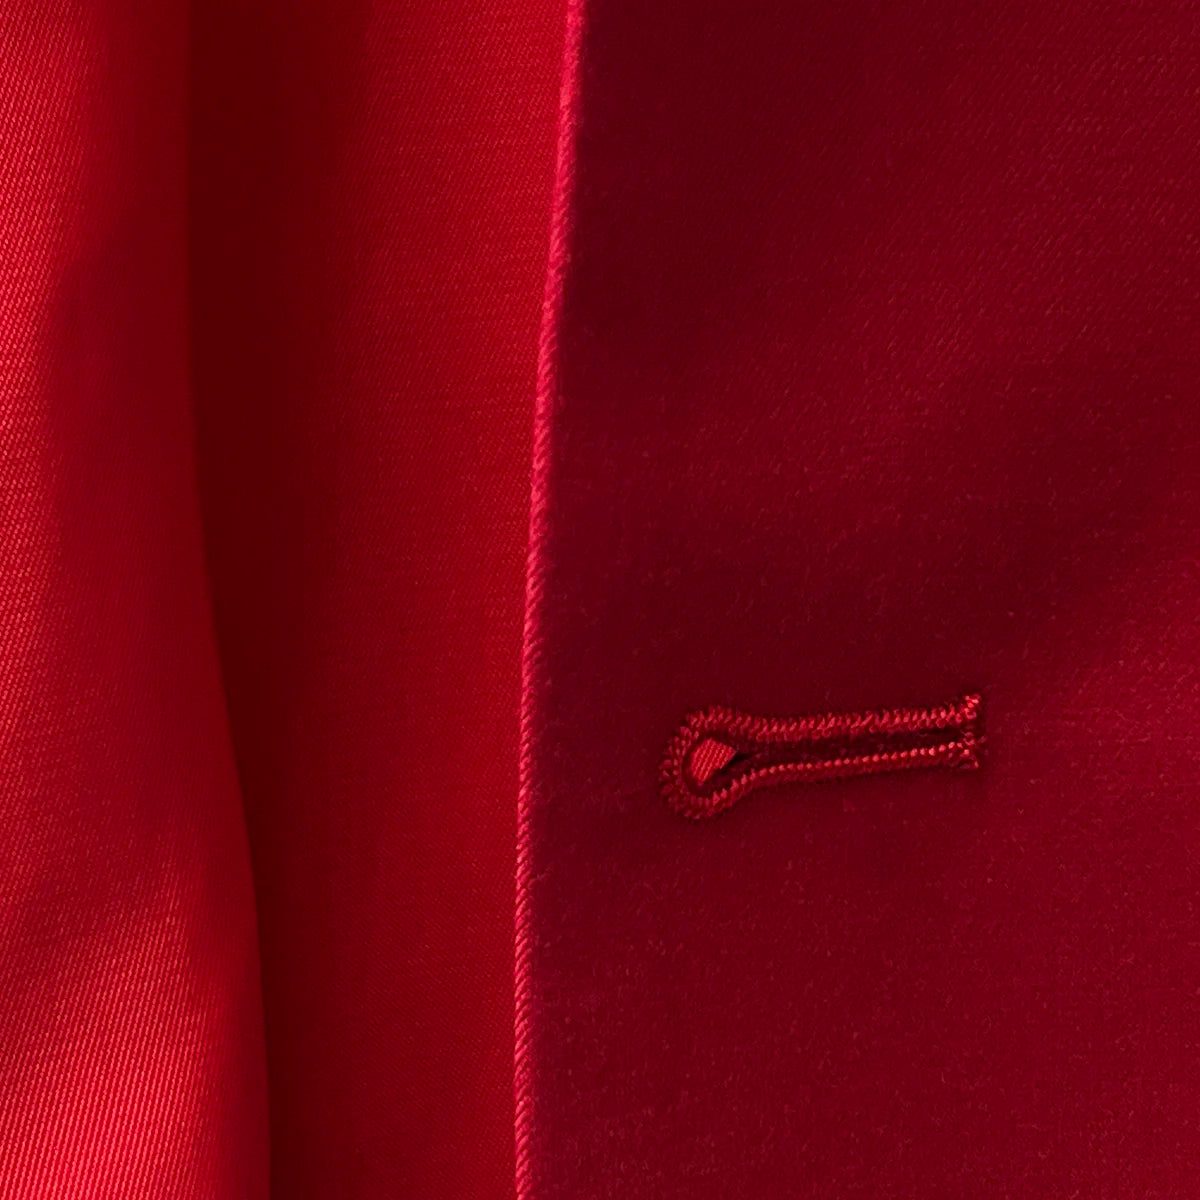 Bemberg lining ensuring a smooth, comfortable fit on a scarlet red, solid plain color suit.